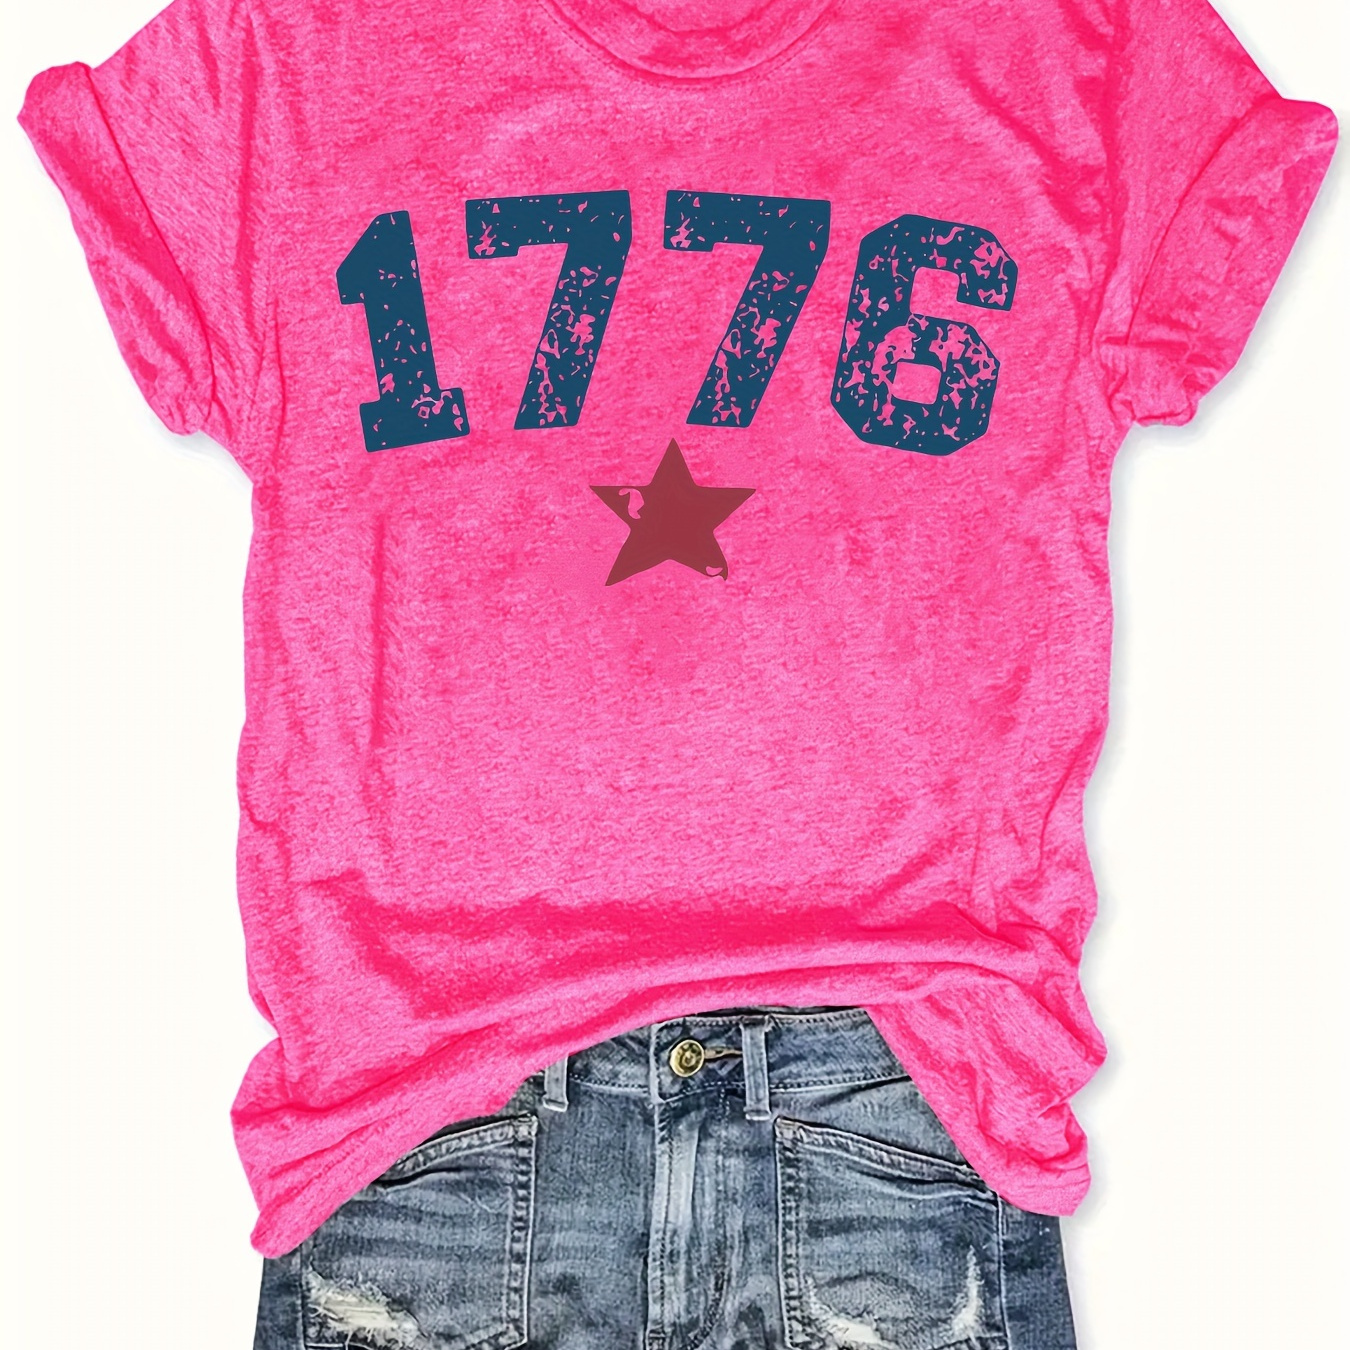 

1776 Print T-shirt, Casual Crew Neck Short Sleeve Top For Spring & Summer, Women's Clothing